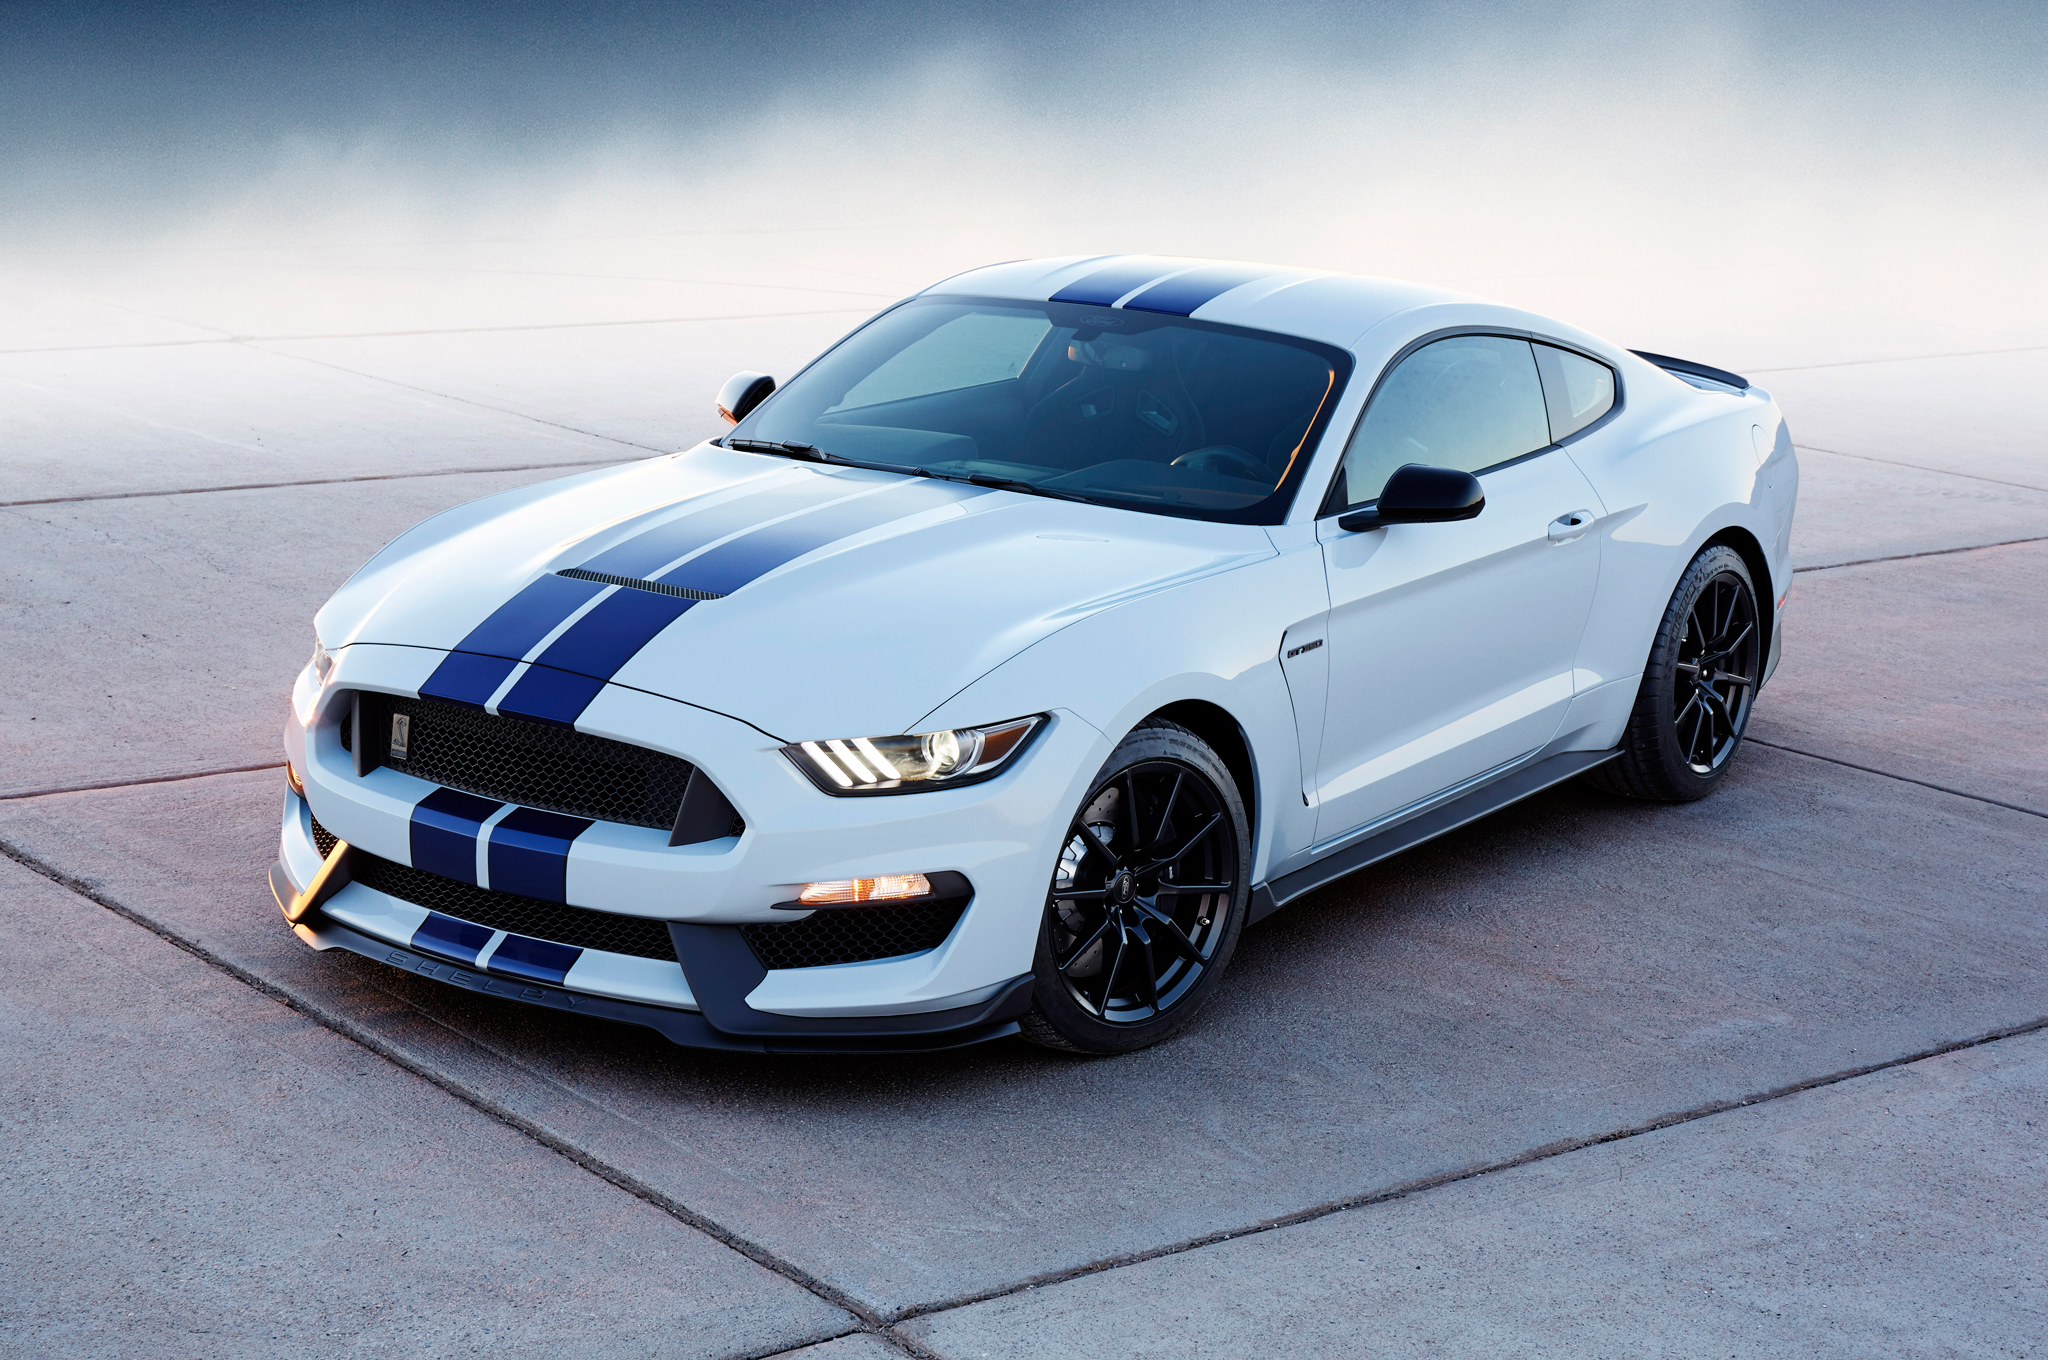 shelby wallpaper,land vehicle,vehicle,car,shelby mustang,motor vehicle